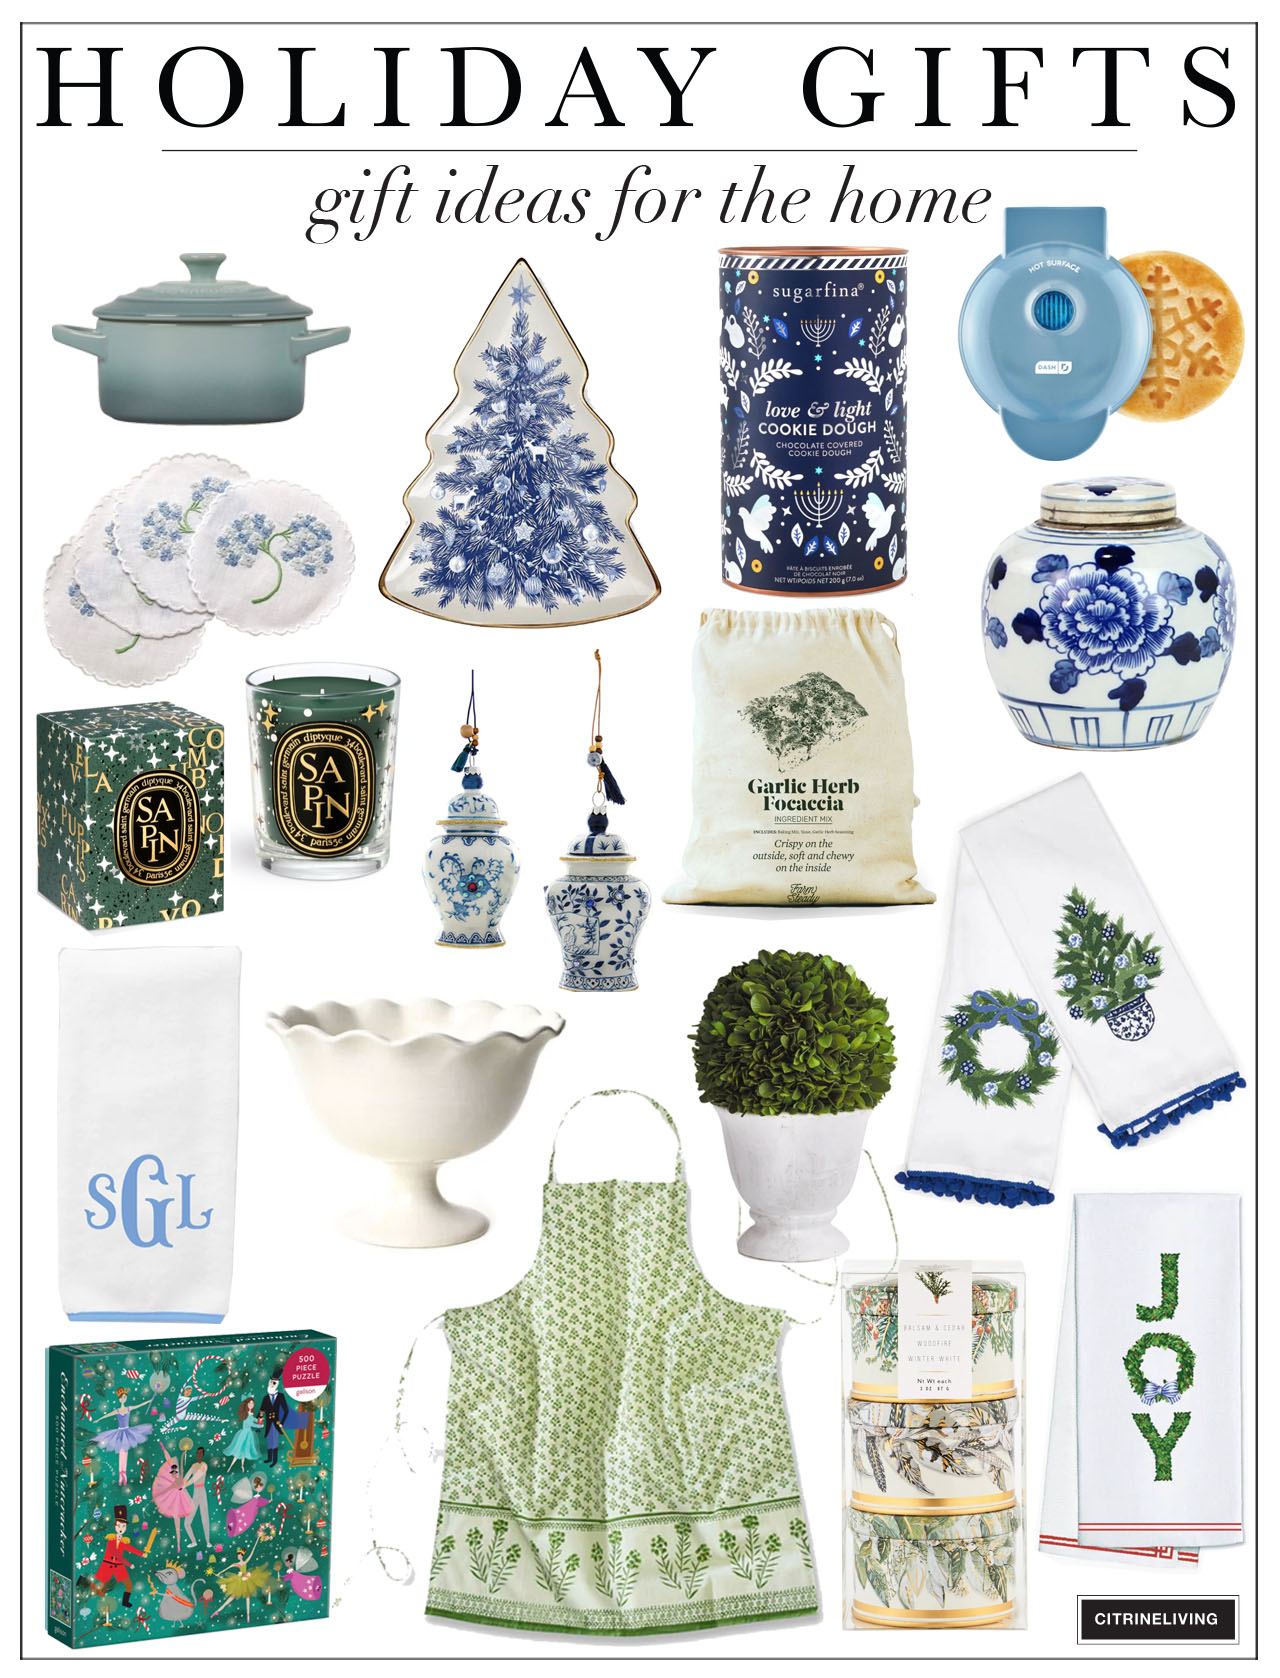 Holiday gifts for the hostess and home! Beautiful serving pieces, ginger jars, towels, candles and more.